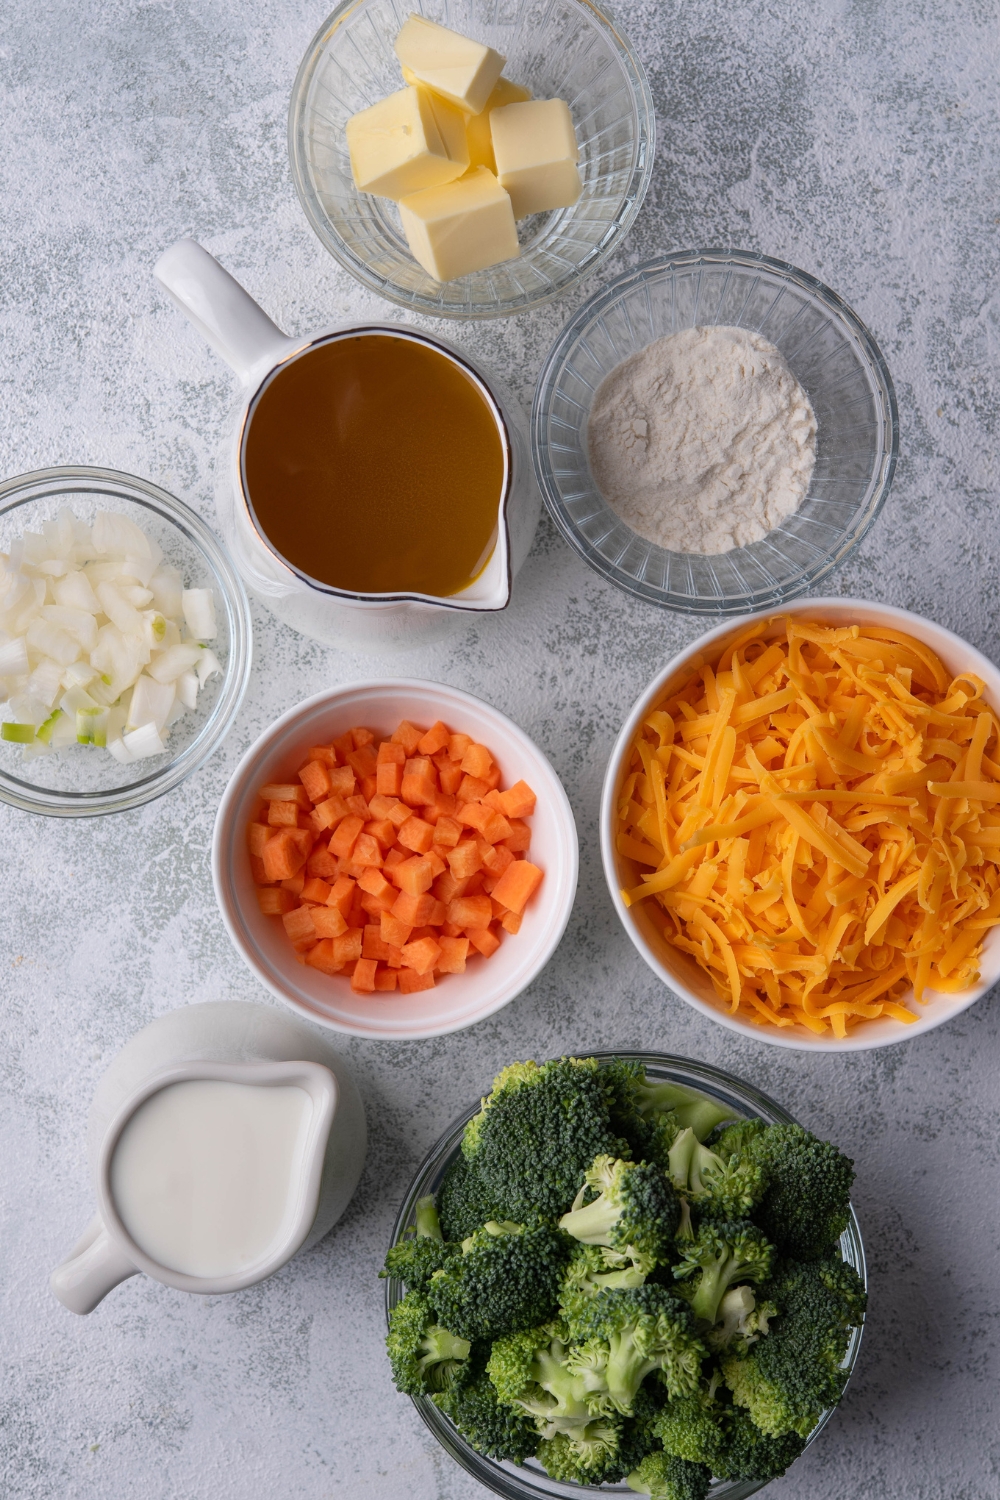 A countertop with the ingredients to make broccoli cheese soup.